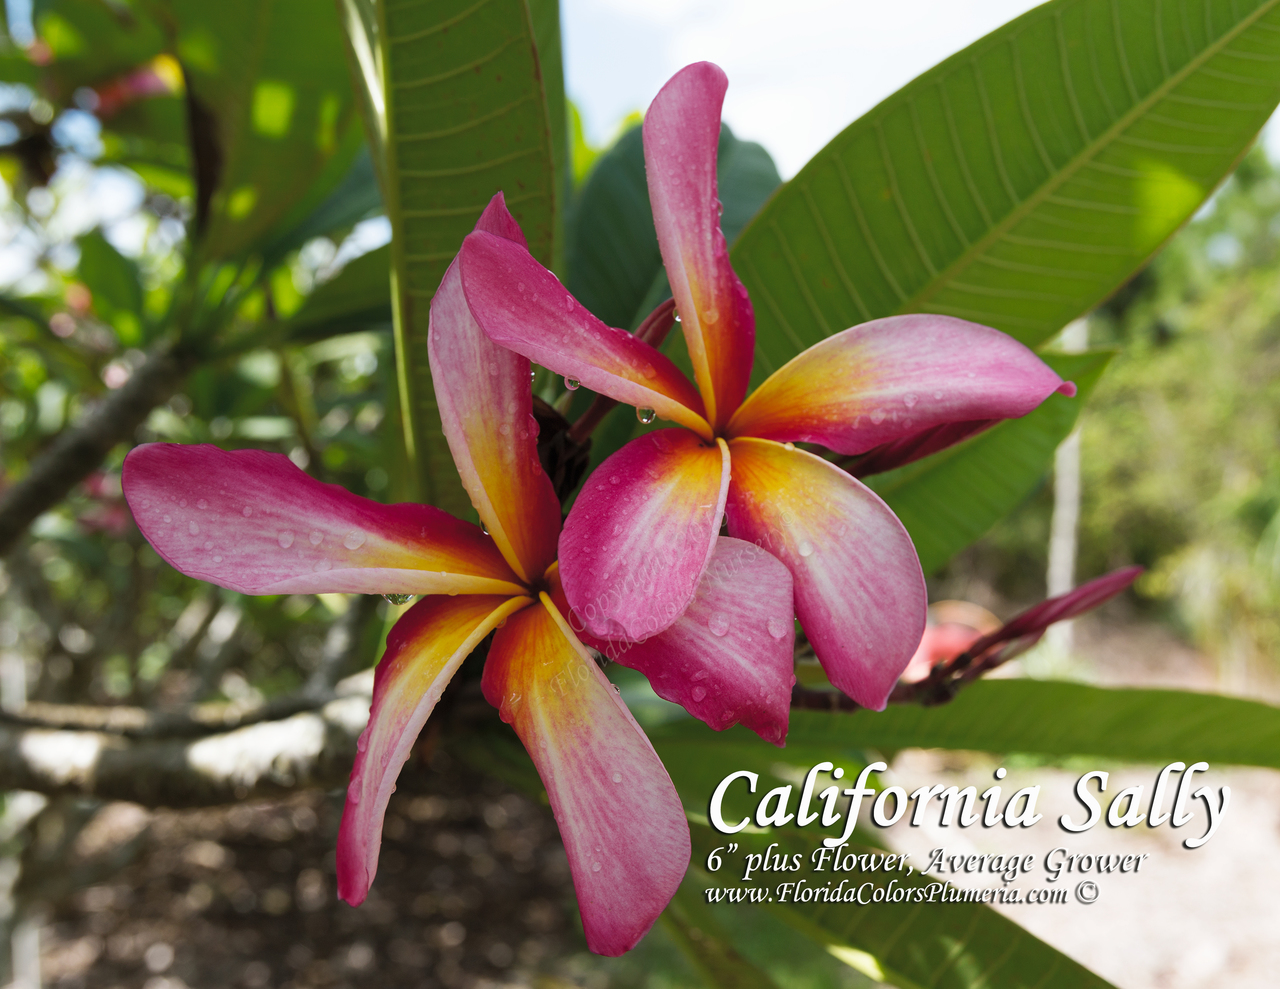 California Sally (rooted) Plumeria Questions & Answers